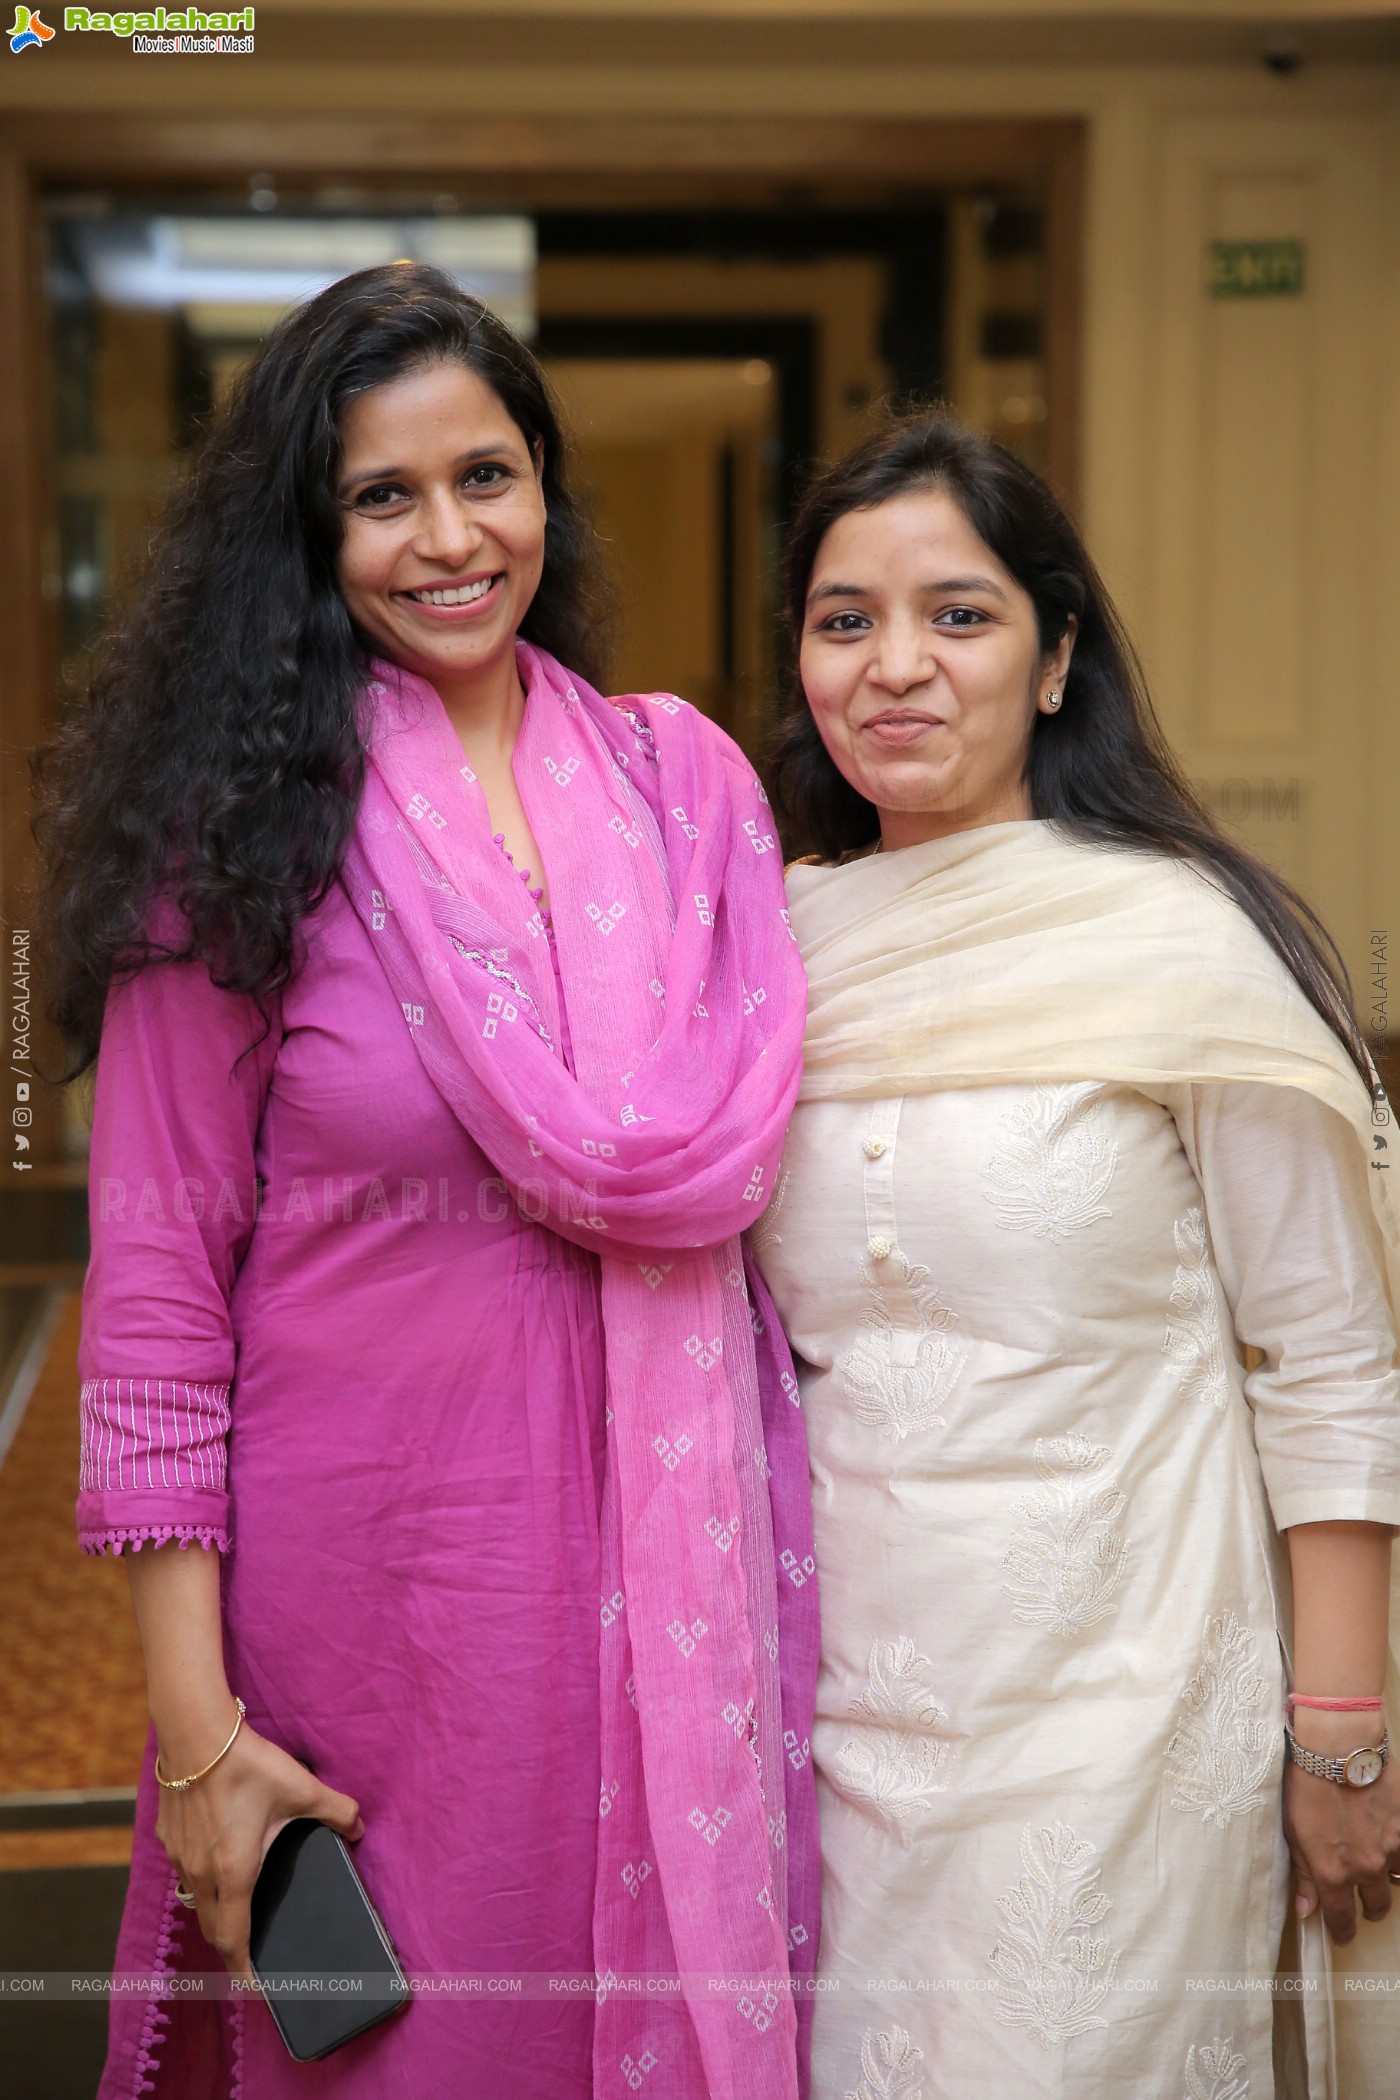 Sanskruti Women's Club Hosts a Session on Holistic Healing for Health and Self Care